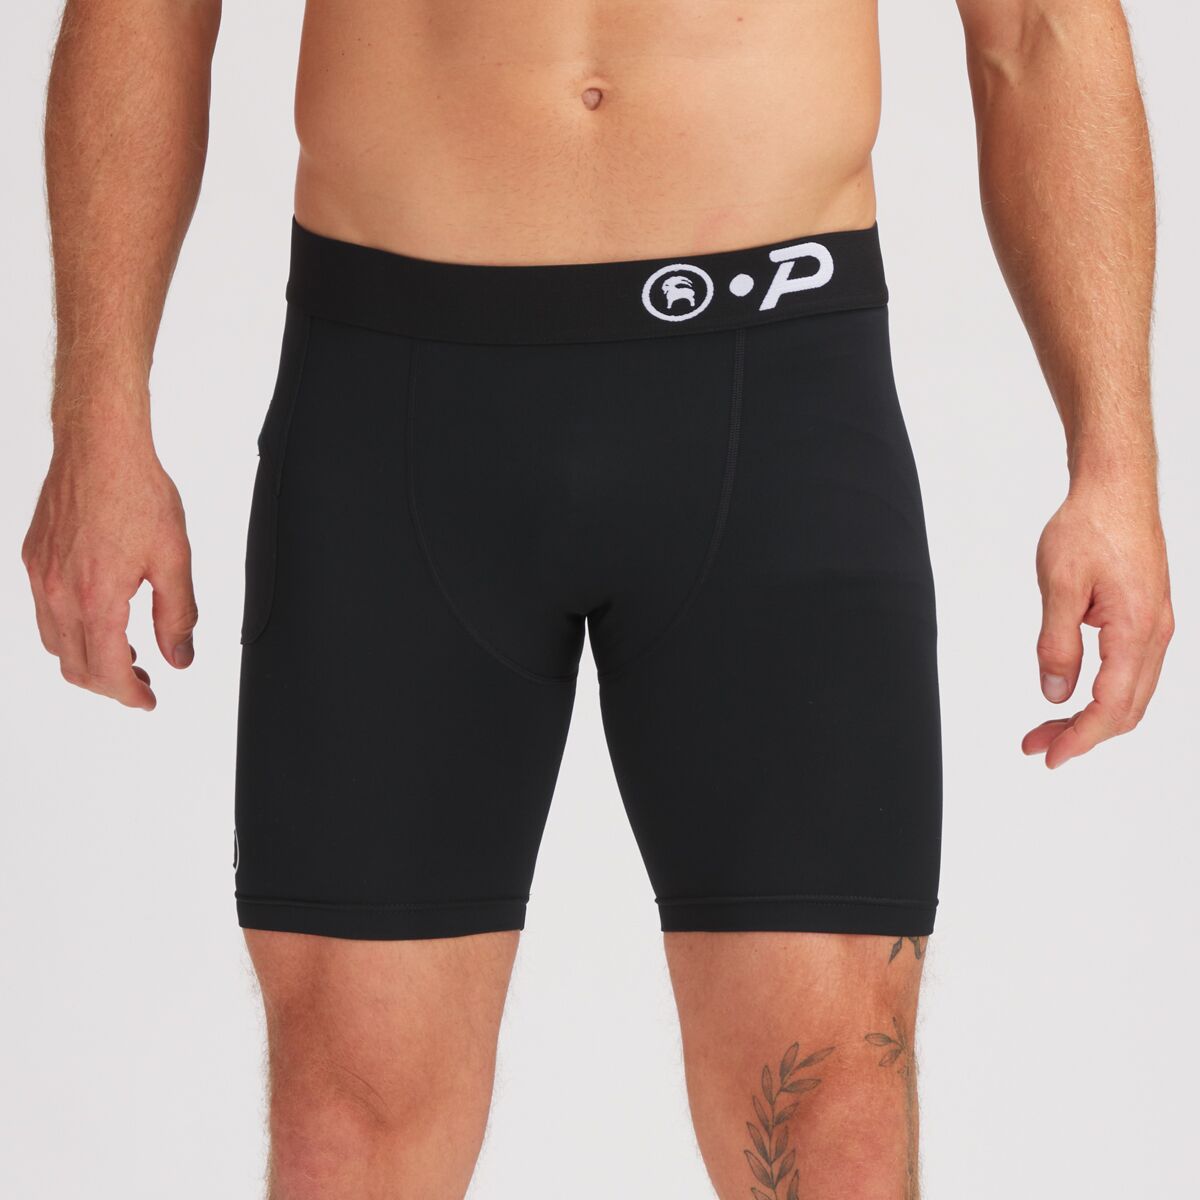 Backcountry X Pacterra Middy Compression Short - Men's